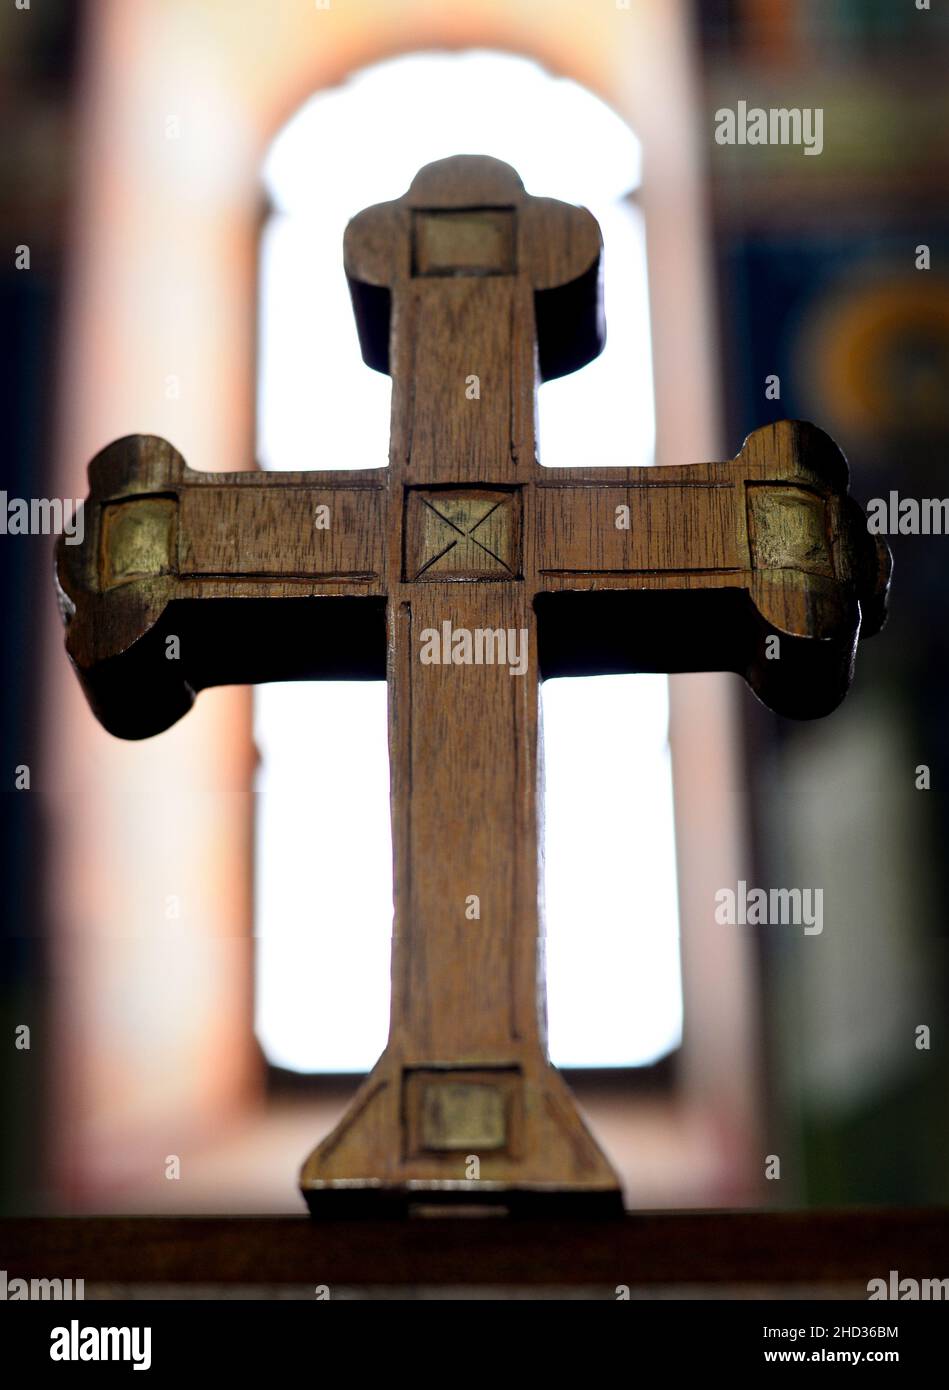 Closeup shot of a wooden ornamented cross against a blurred background inside the church Stock Photo